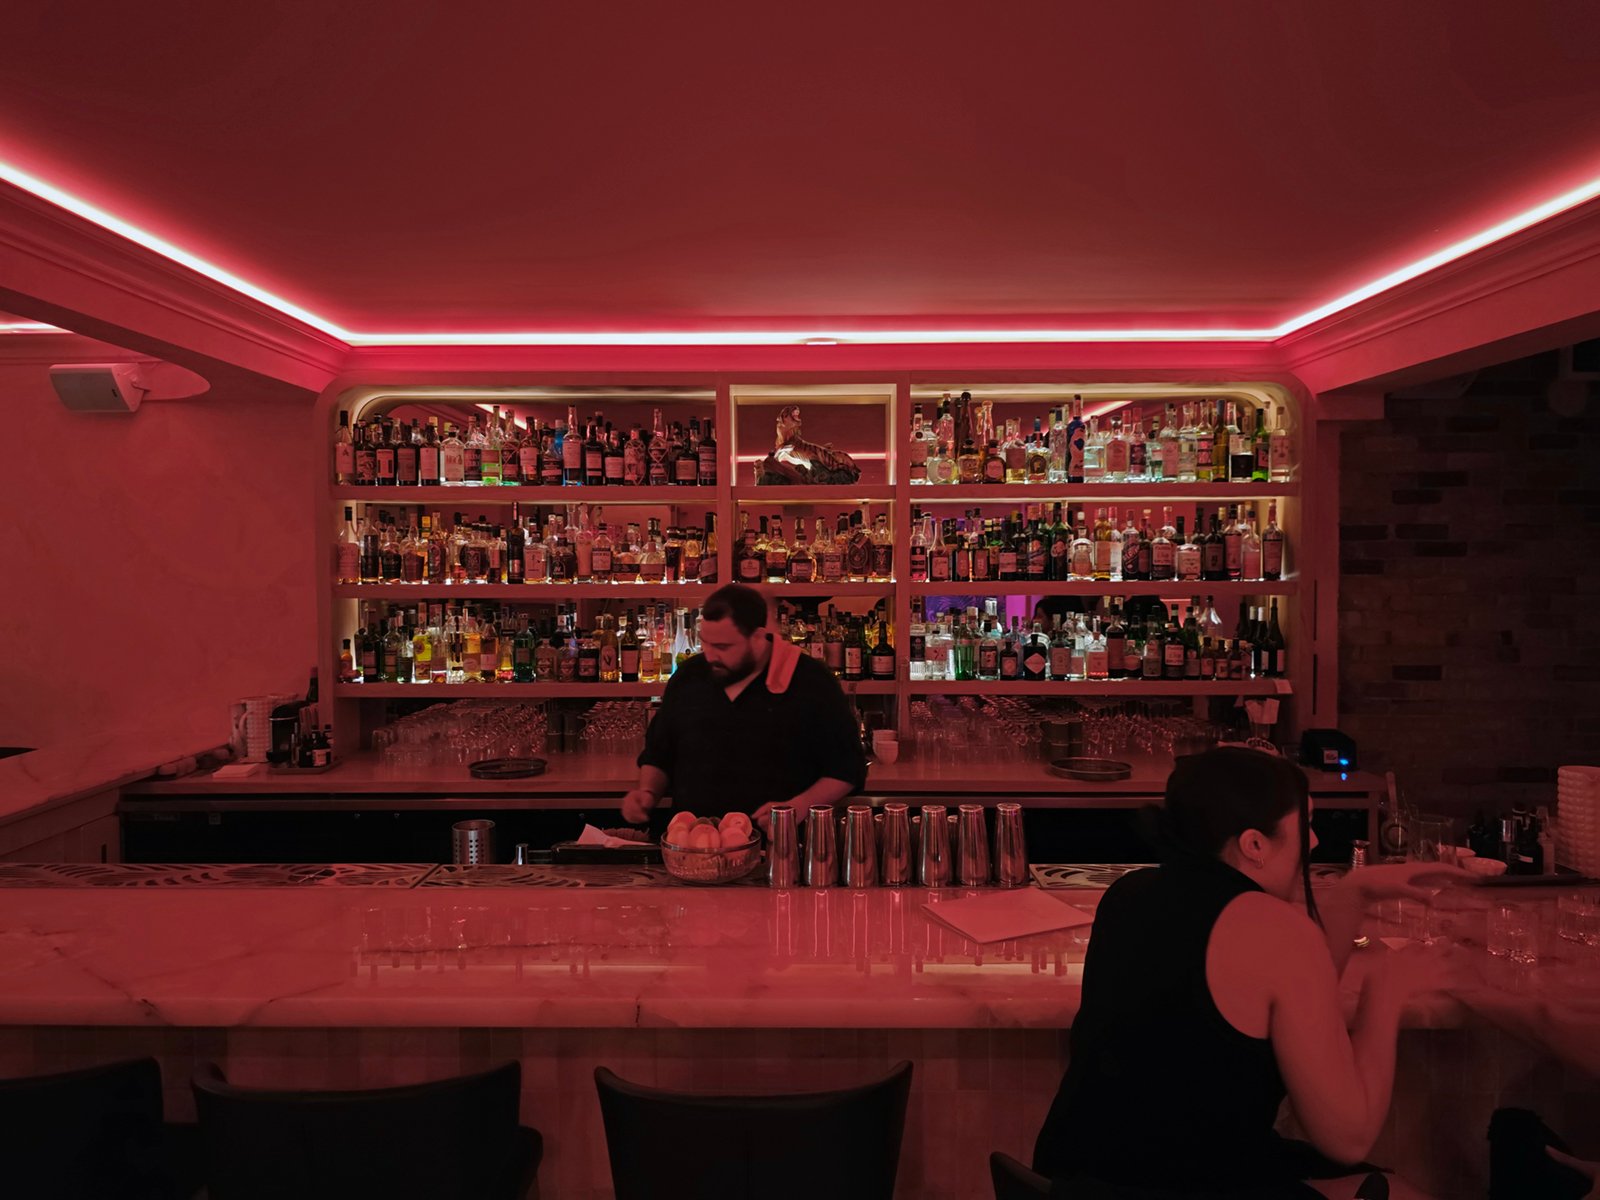 A dimly lit bar with ambient red lighting, featuring a bartender behind the bar and a customer seated at the counter. shelves stocked with various bottles line the back wall.